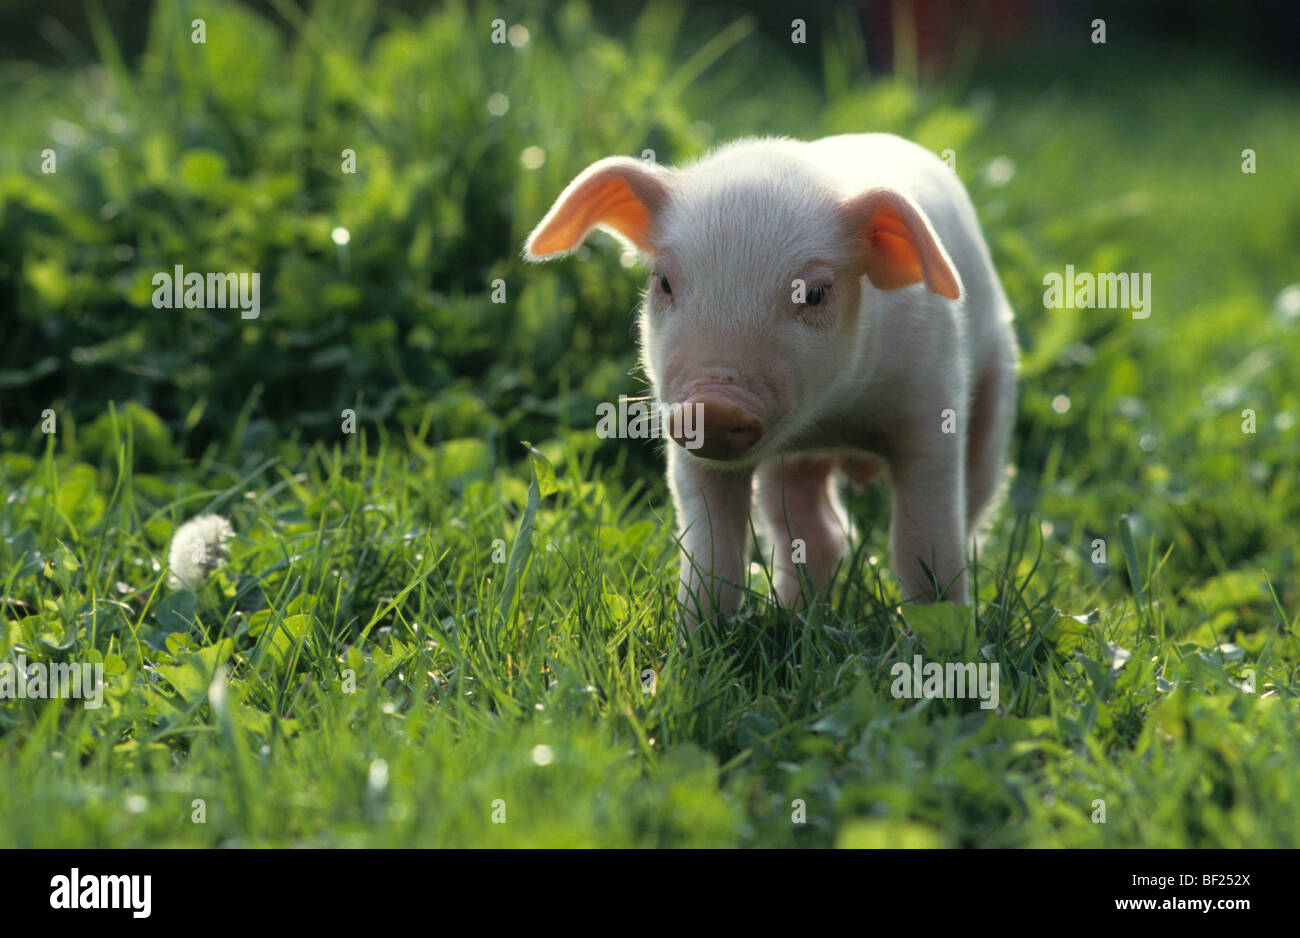 Domestic Pig (Sus scrofa domestica), piglet standing on grass. Stock Photo